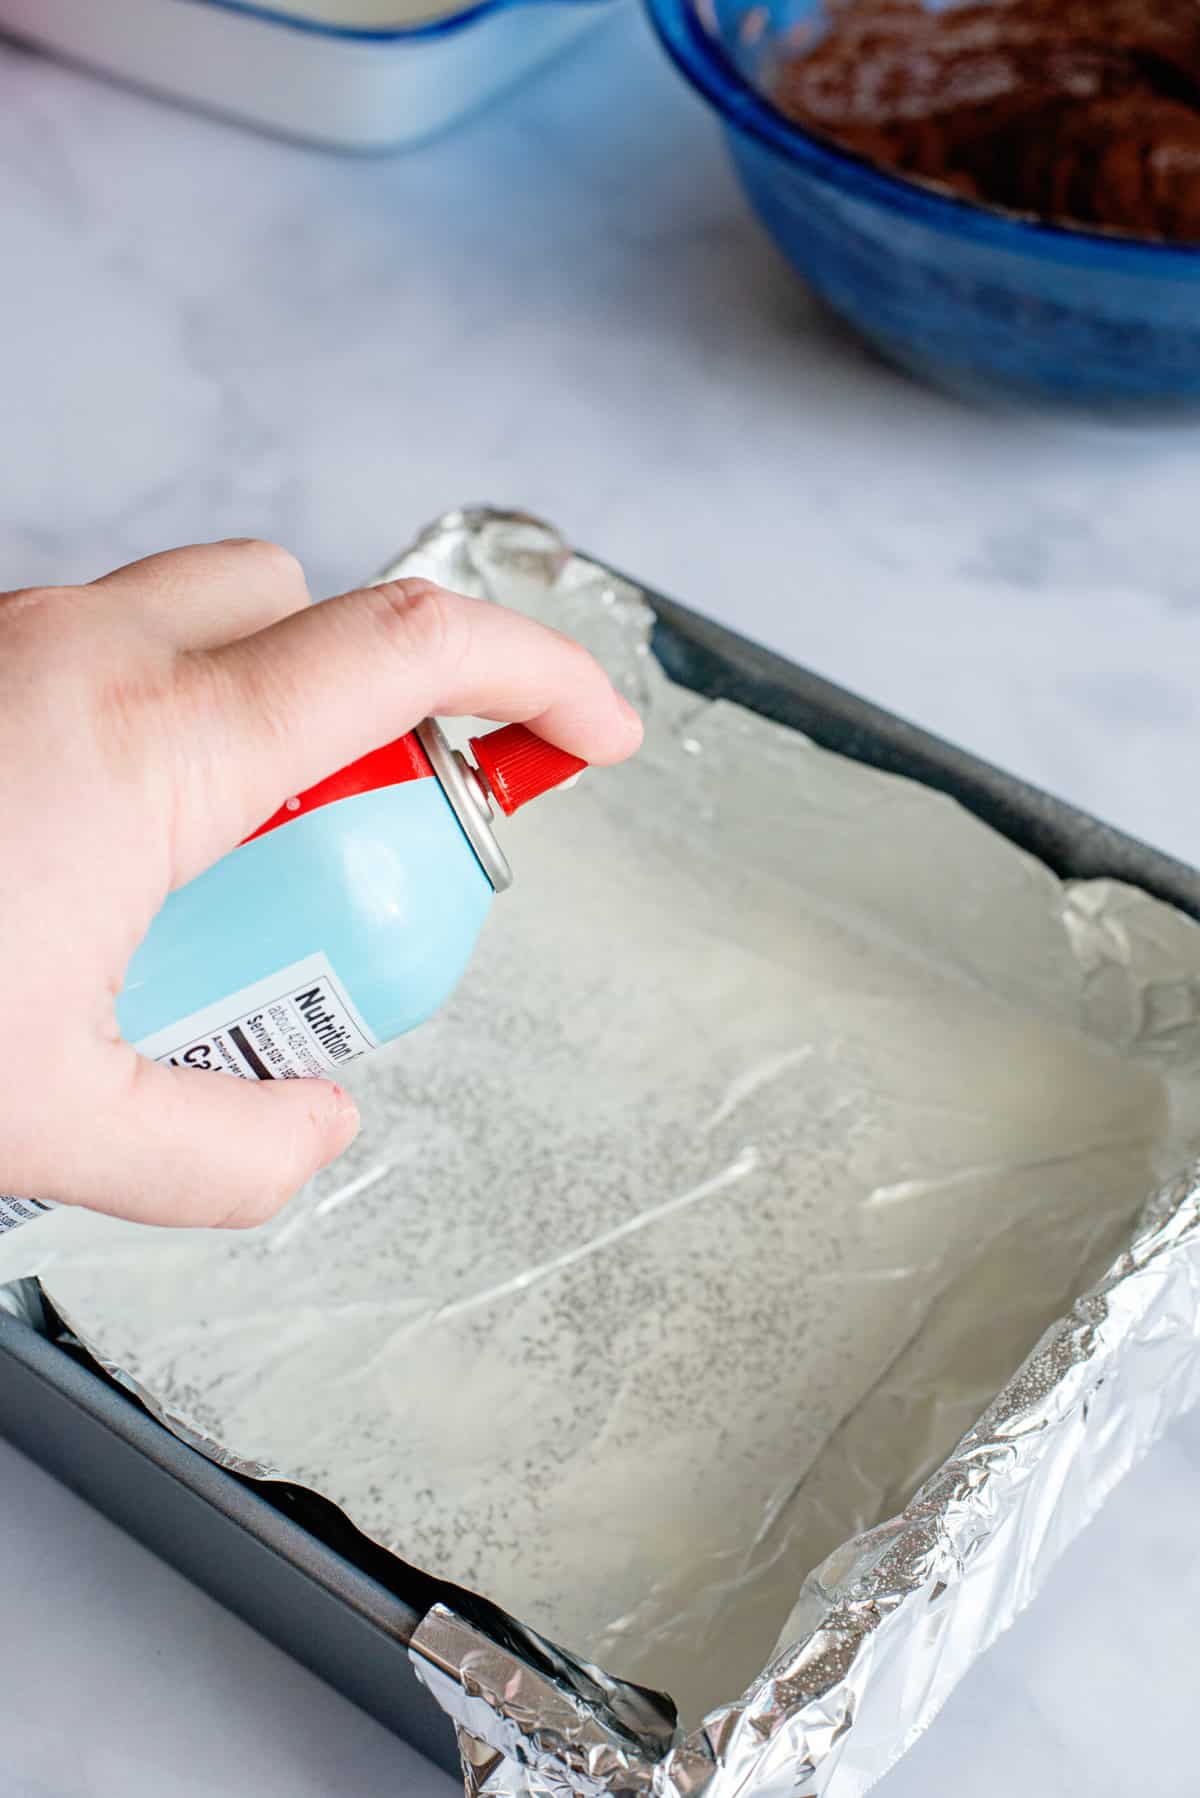 Preheat oven to 350 degrees. Spray an 8x8 baking pan with non-stick baking spray. Optional: For easy removal, line the pan with foil before spraying.